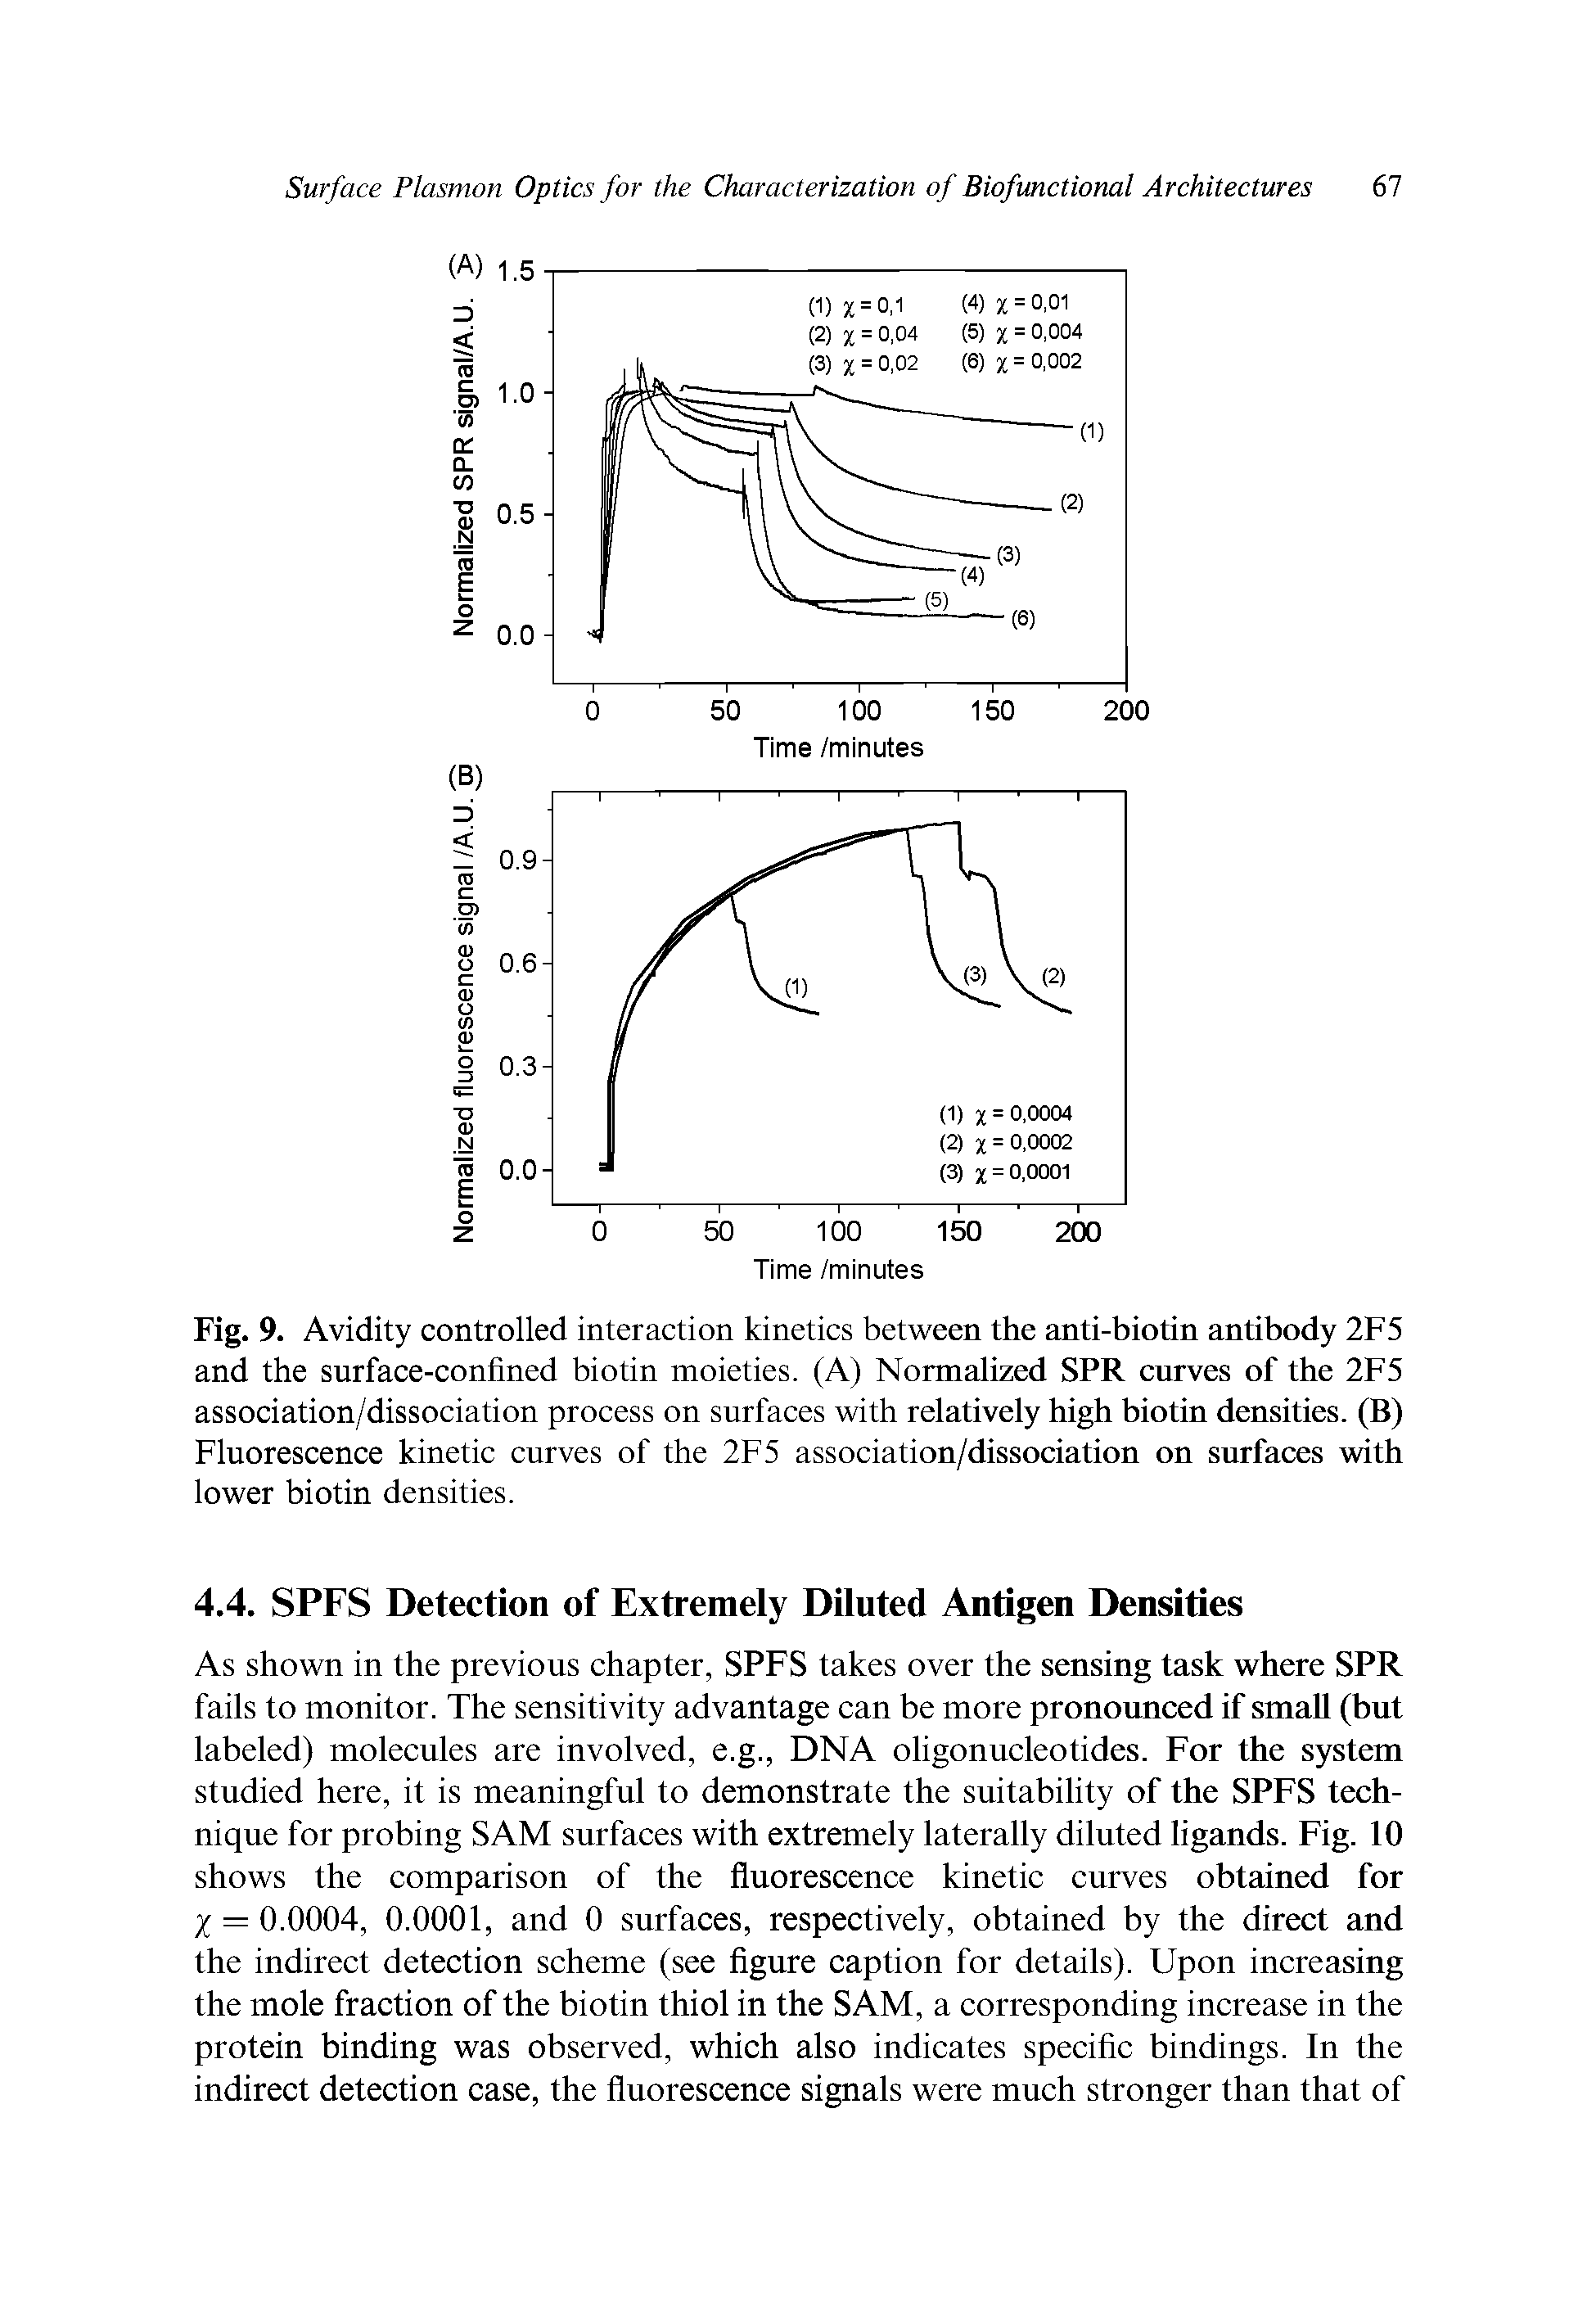 Fig. 9. Avidity controlled interaction kinetics between the anti-biotin antibody 2F5 and the surface-confined biotin moieties. (A) Normalized SPR curves of the 2F5 association/dissociation process on surfaces with relatively high biotin densities. (B) Fluorescence kinetic curves of the 2F5 association/dissociation on surfaces with lower biotin densities.